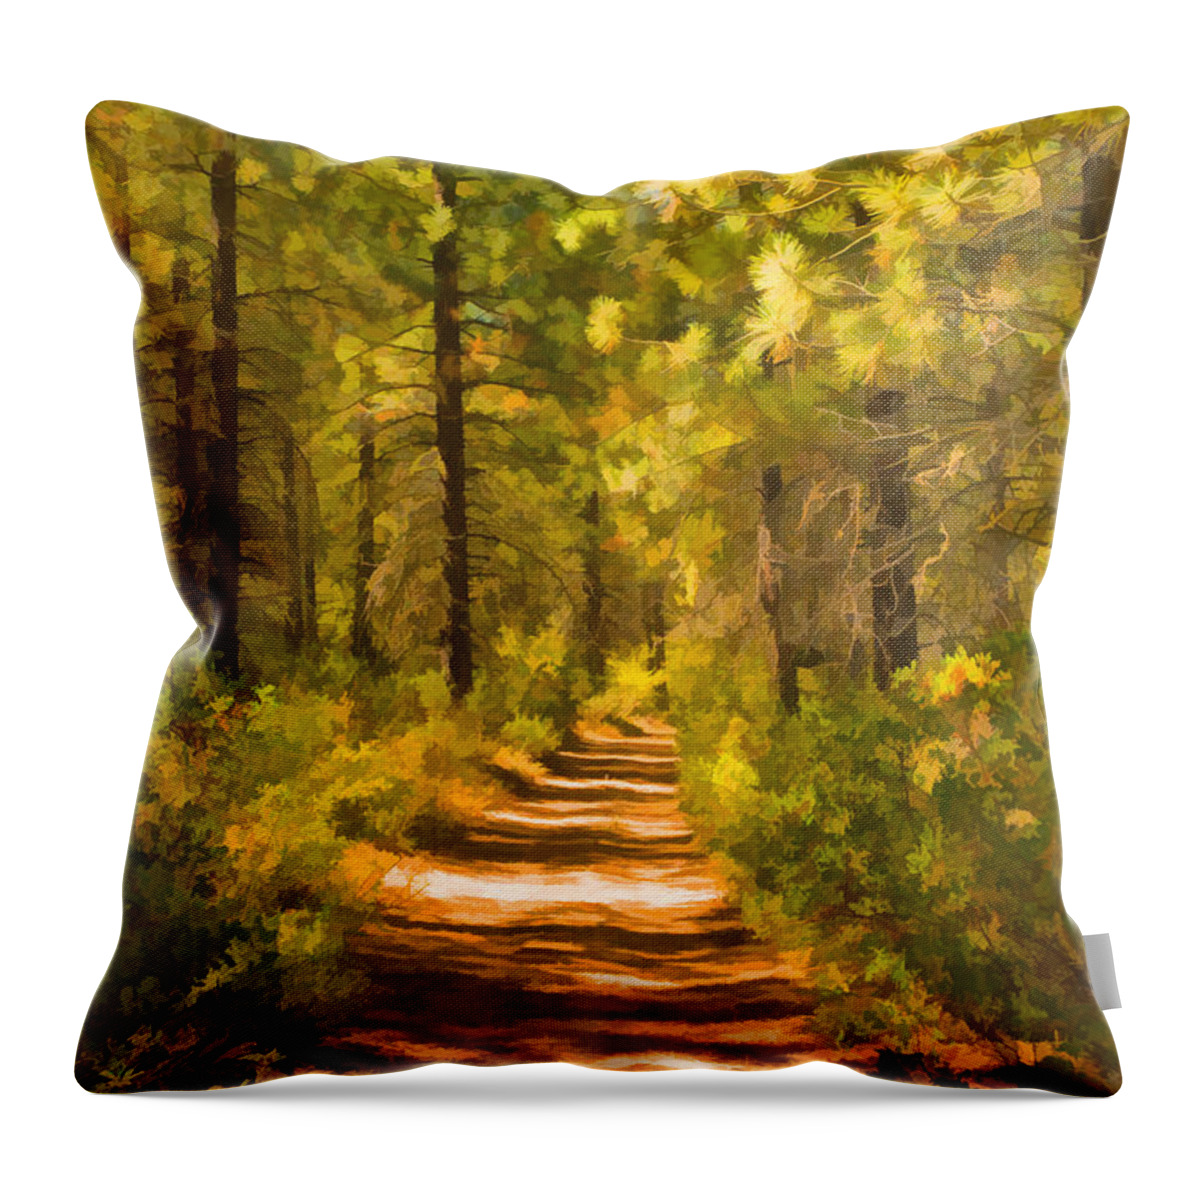 Trail Throw Pillow featuring the digital art Trail Through the Woods by Mick Burkey